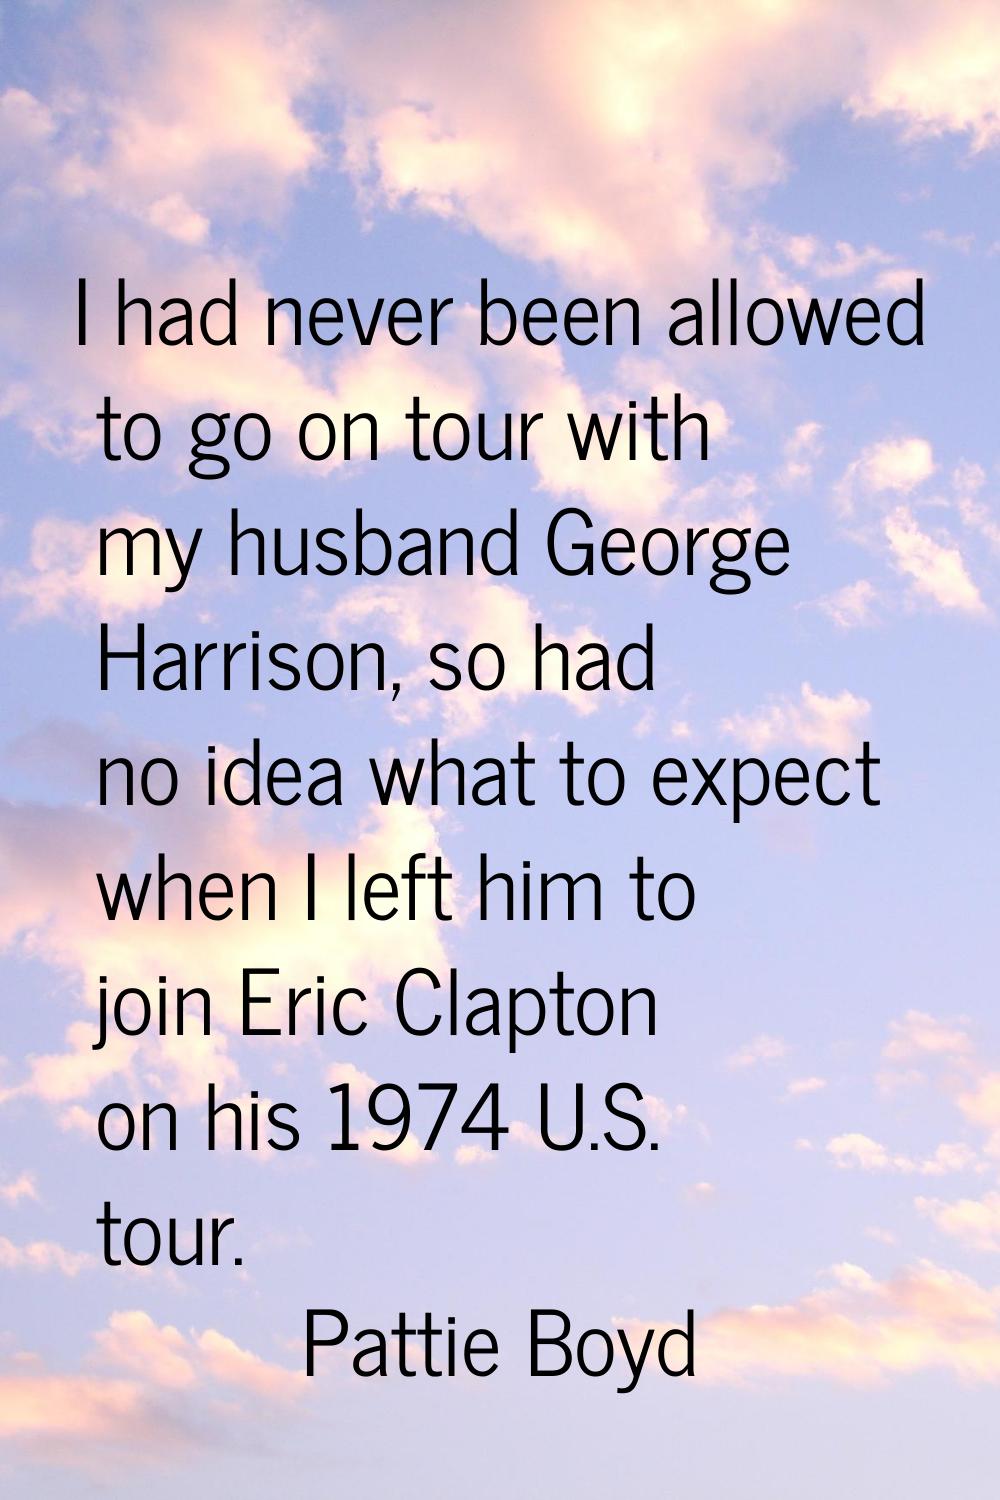 I had never been allowed to go on tour with my husband George Harrison, so had no idea what to expe